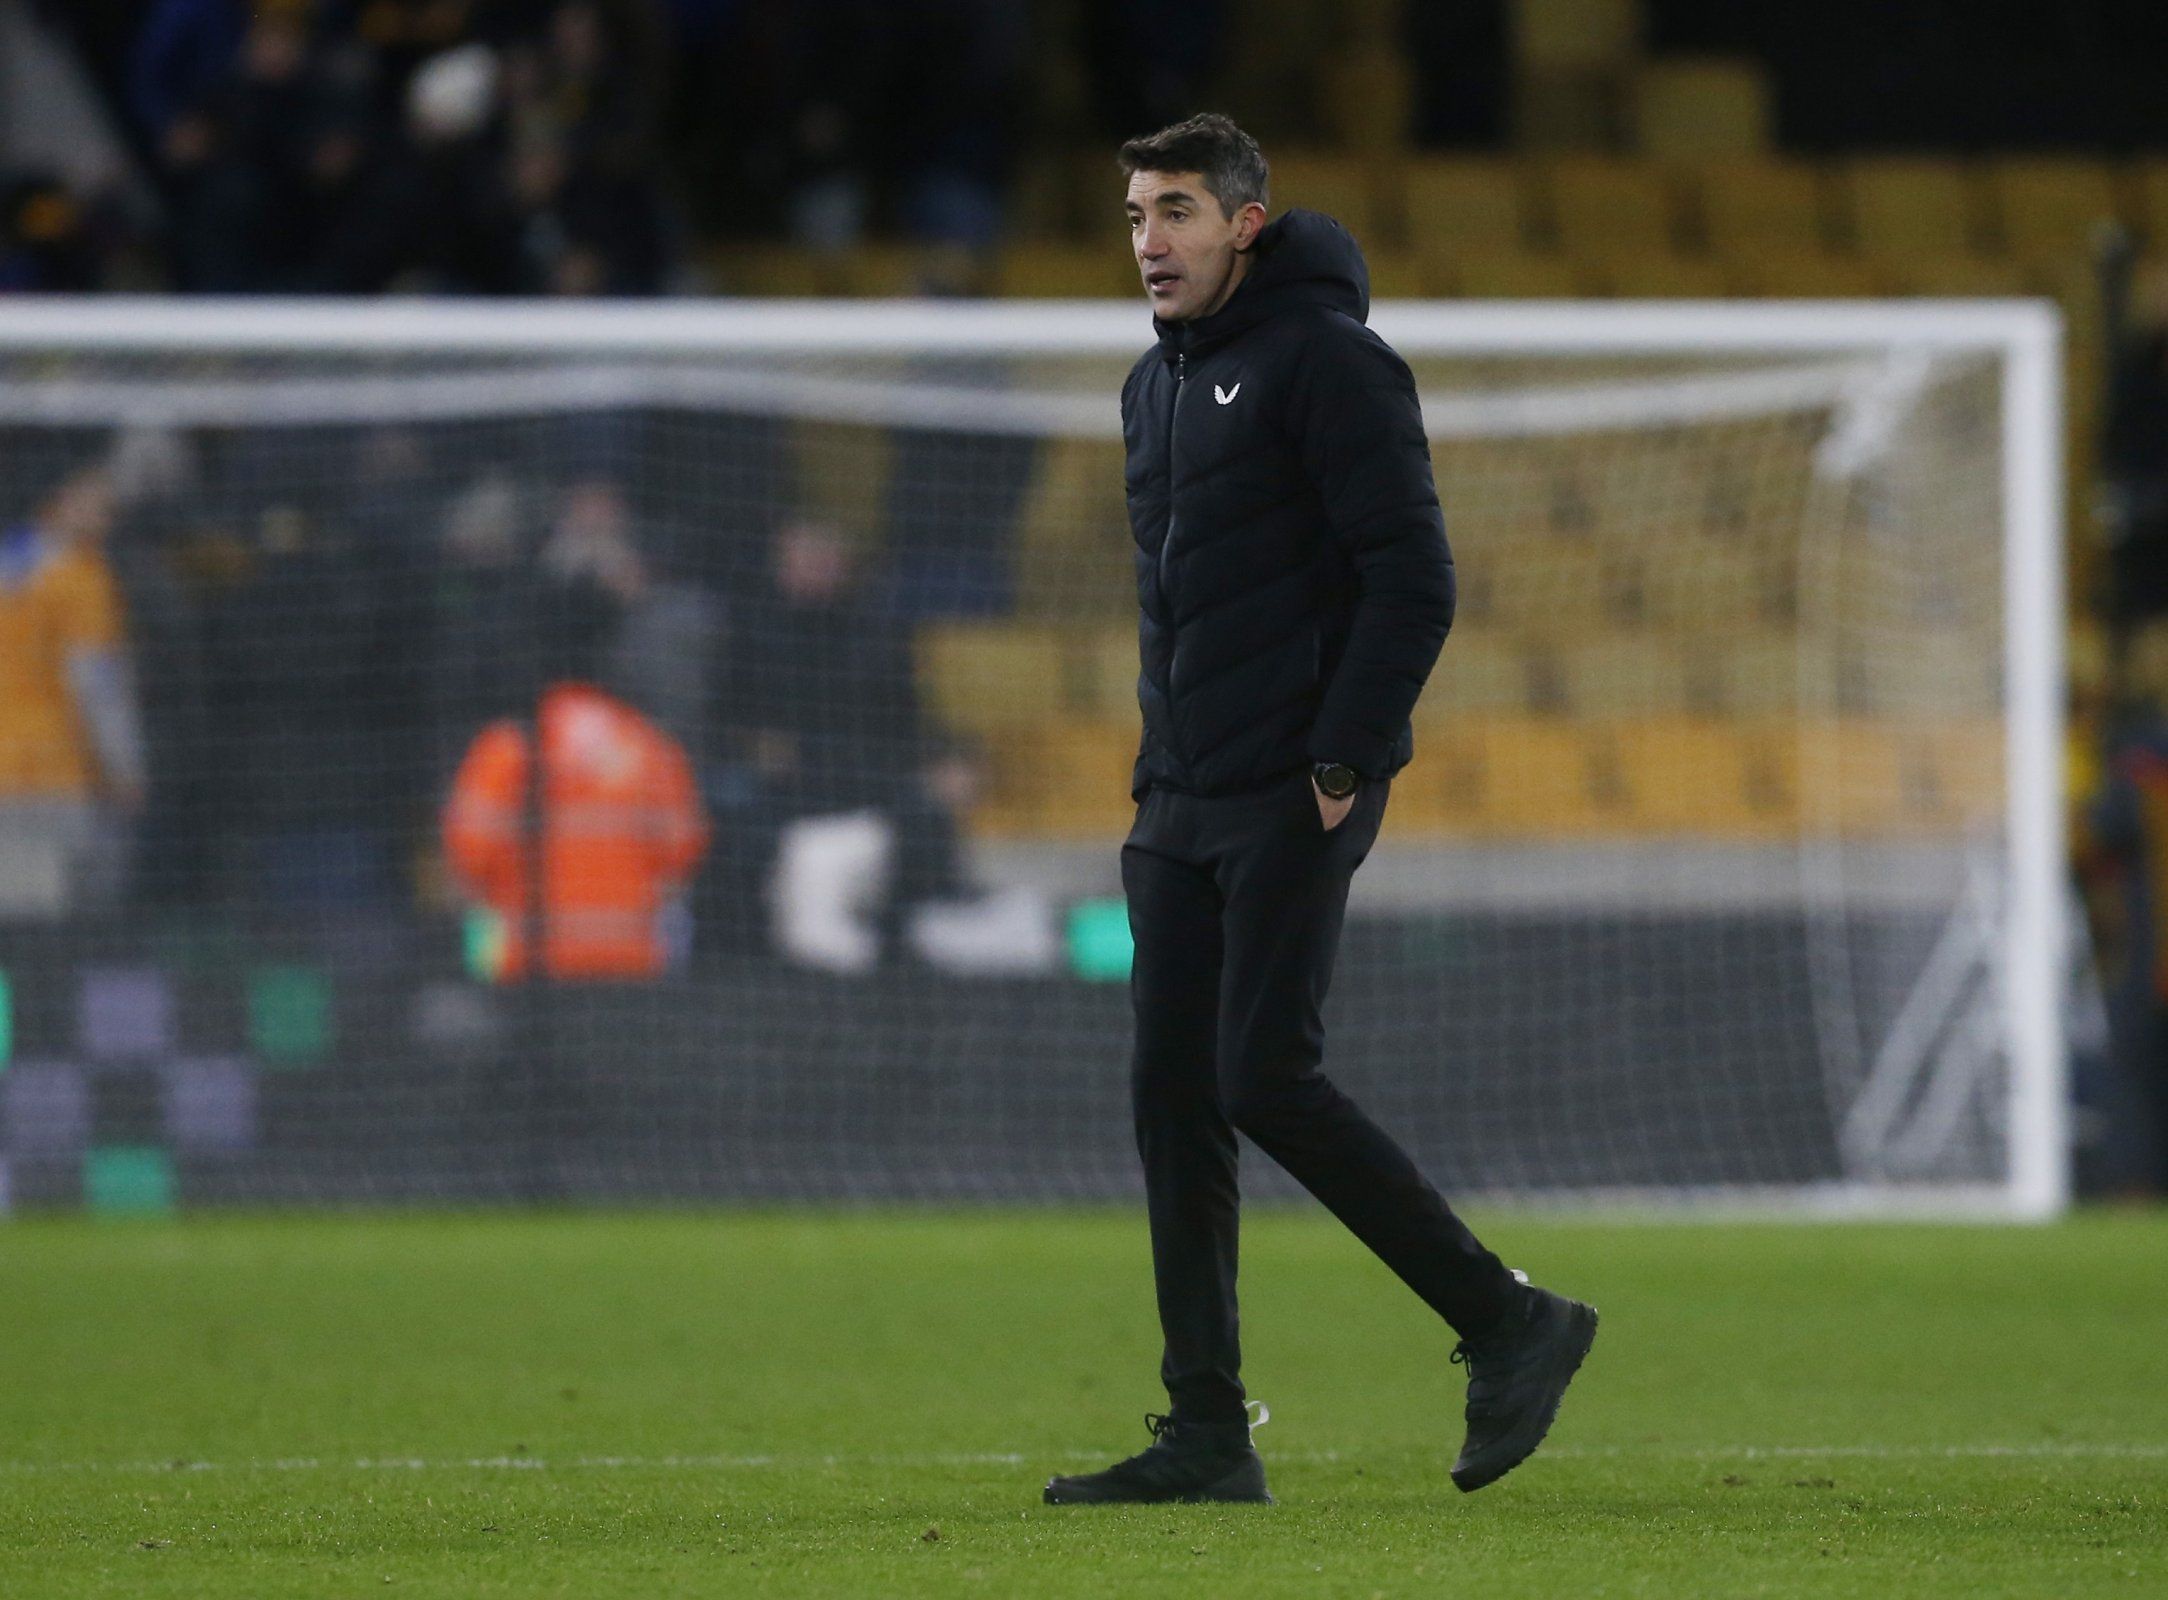 Bruno Lage, Fosun, Jeff Shi, Molineux, The Old Gold, Wolves, Wolves fans, Wolves info, Wolves latest, Wolves news, Wolves updates, WWFC, WWFC news, WWFC update, Premier League, Premier League news, Wolverhampton Wanderers, Willy Boly, Romain Saiss, 
